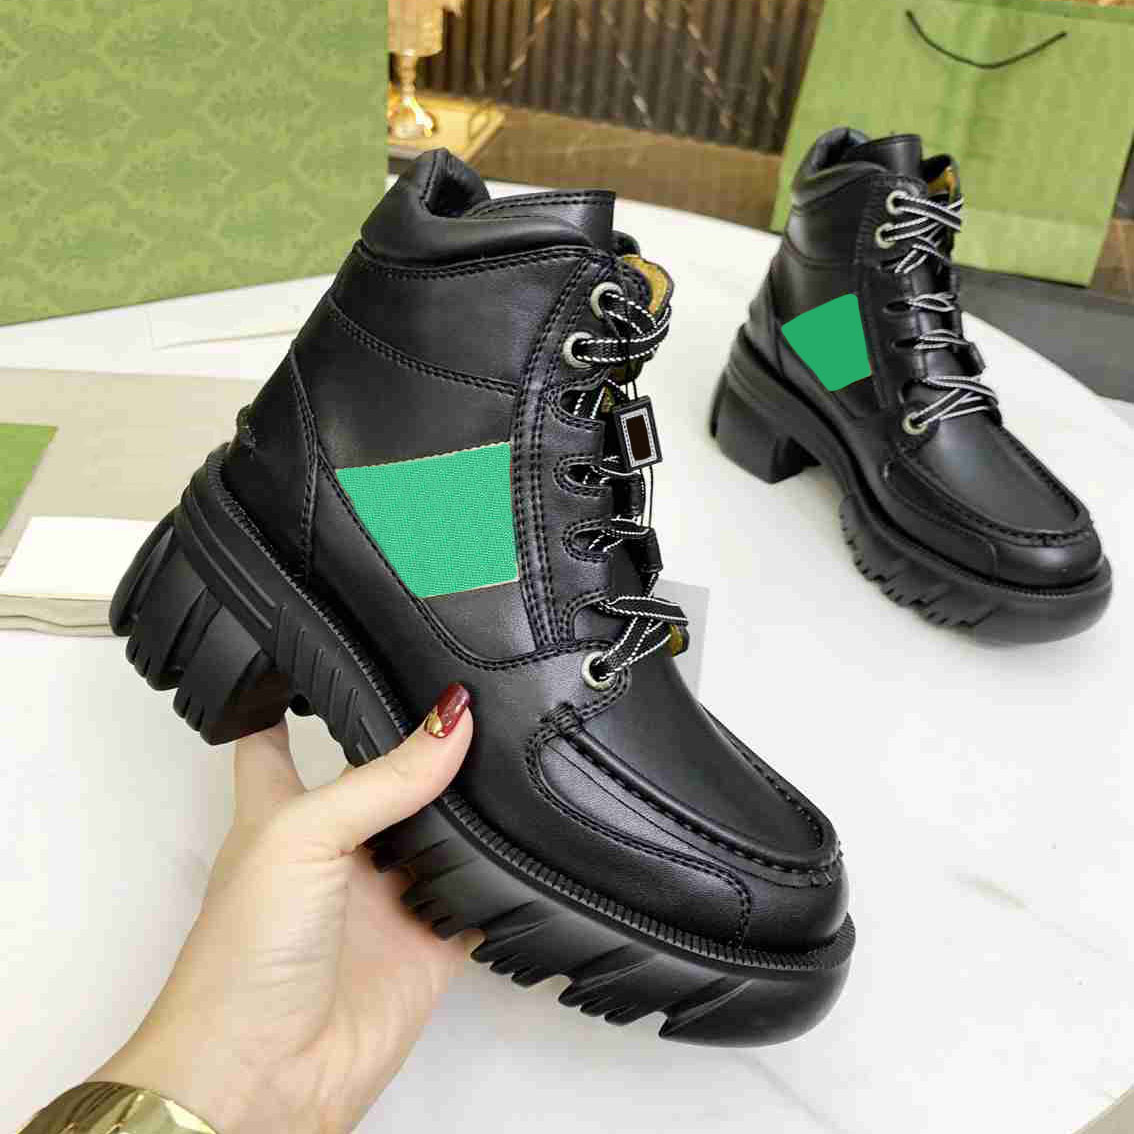 Spring and Autumn Hot Selling WOMEN LEATHER LUG SOLE LOAFER Thick Sole Elevated Shoe Horsebit Classic Women Shoe with box size 35-41 International Standard Size